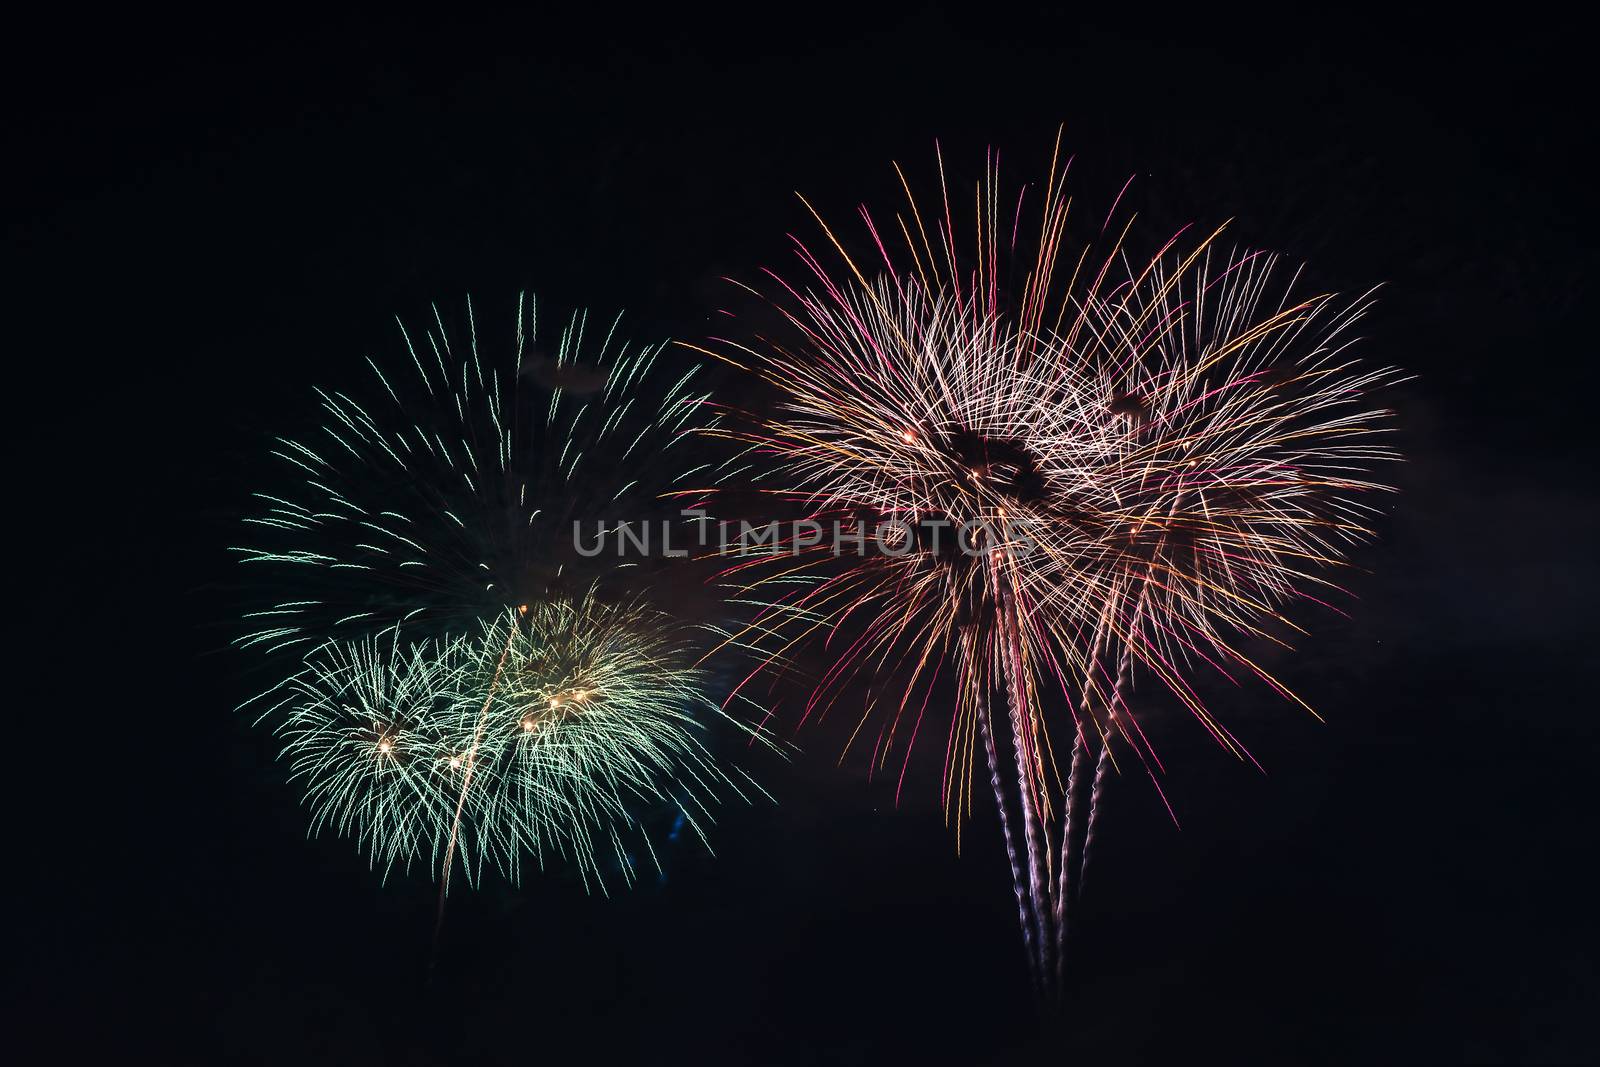 Colorful fireworks display at holiday night.